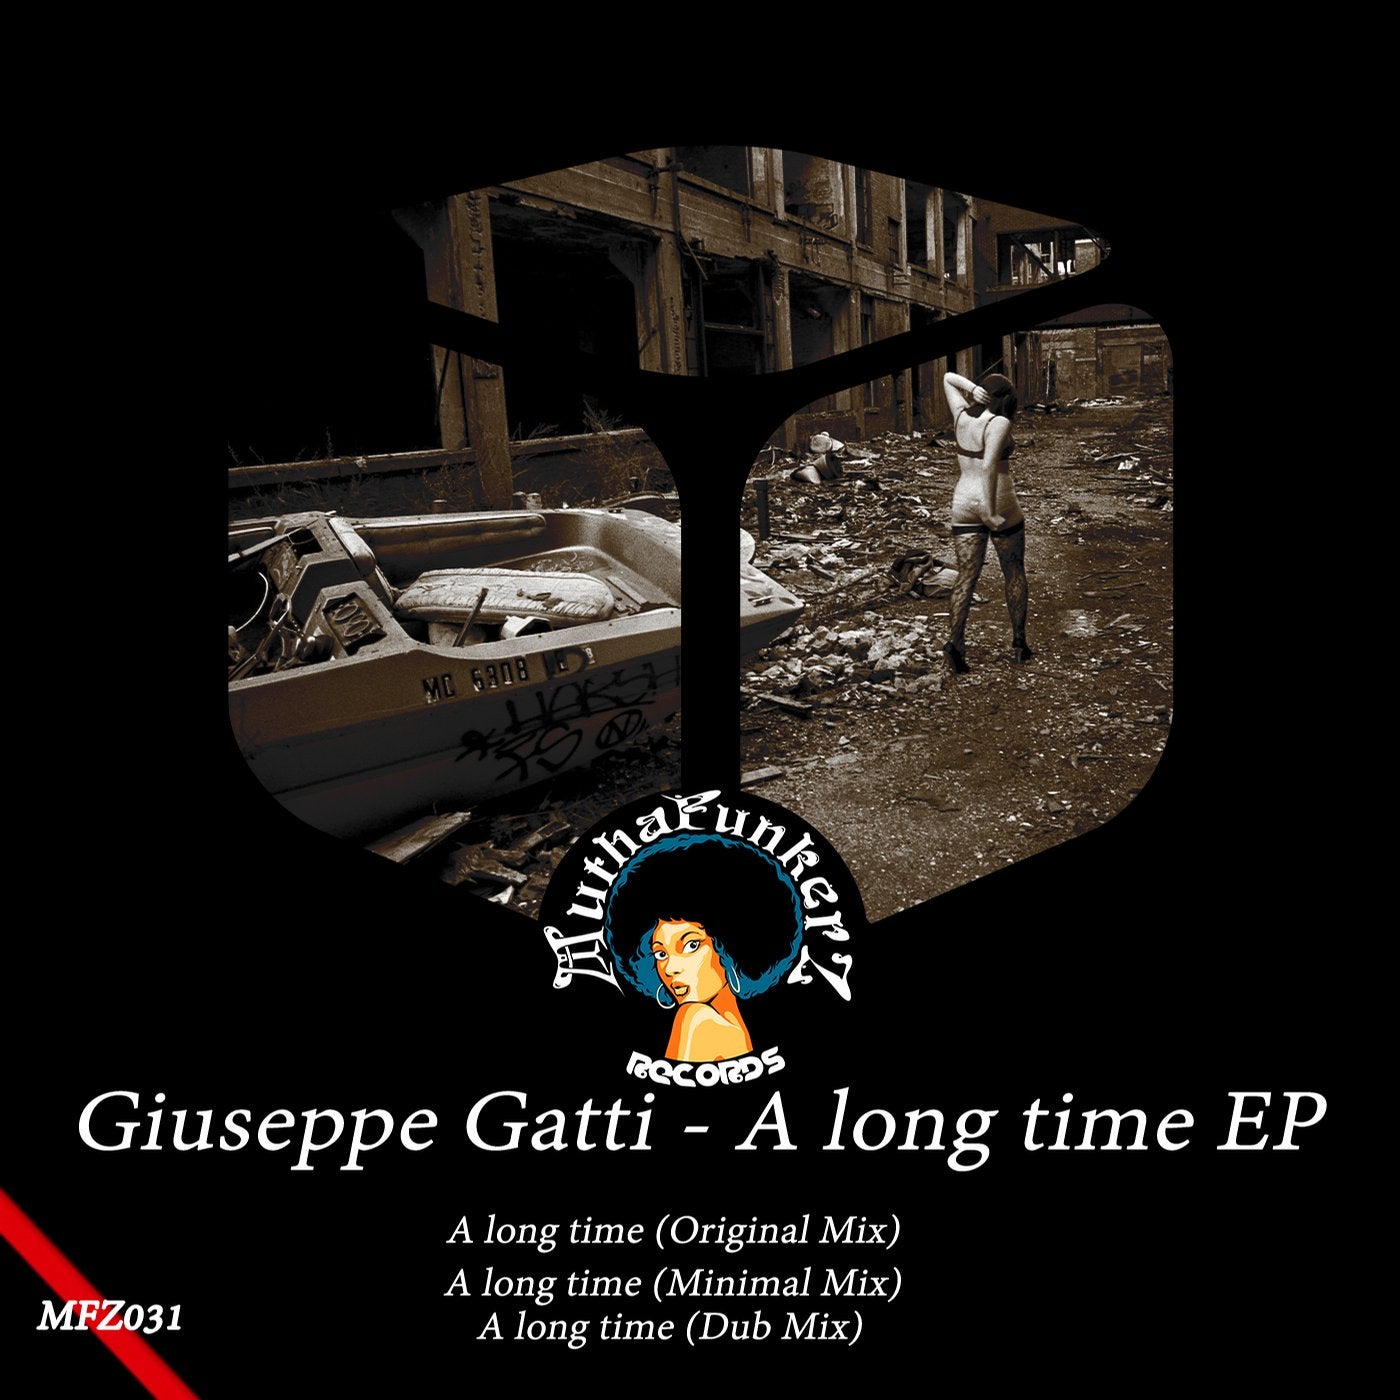 A long time EP